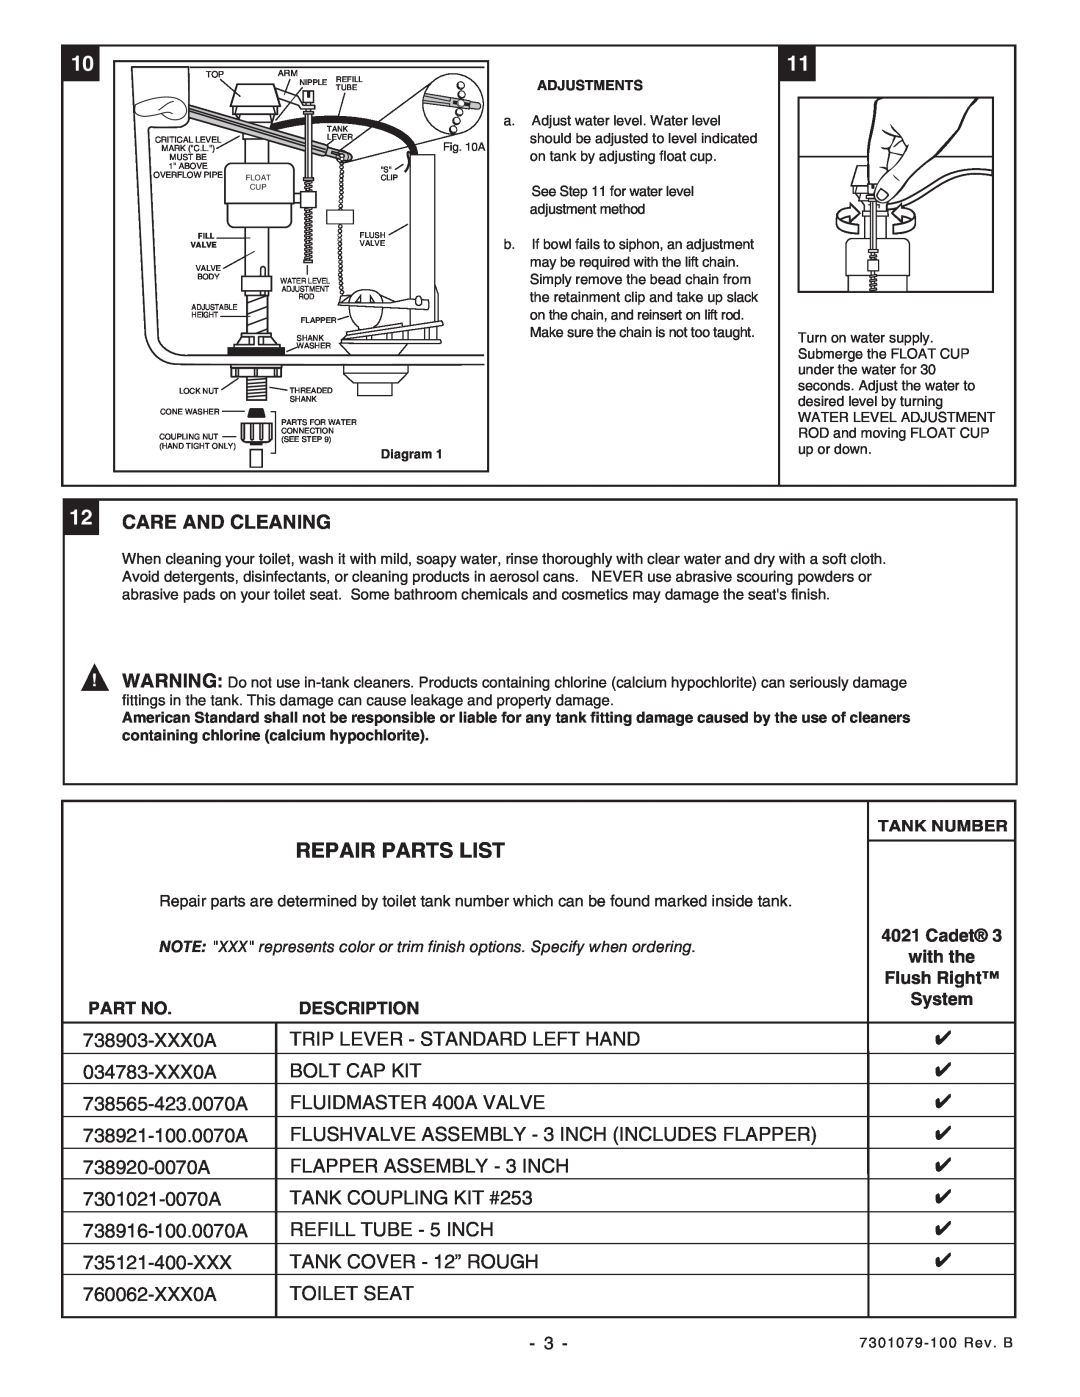 American Standard 3305 installation instructions Repair Parts List, 12CARE AND CLEANING 